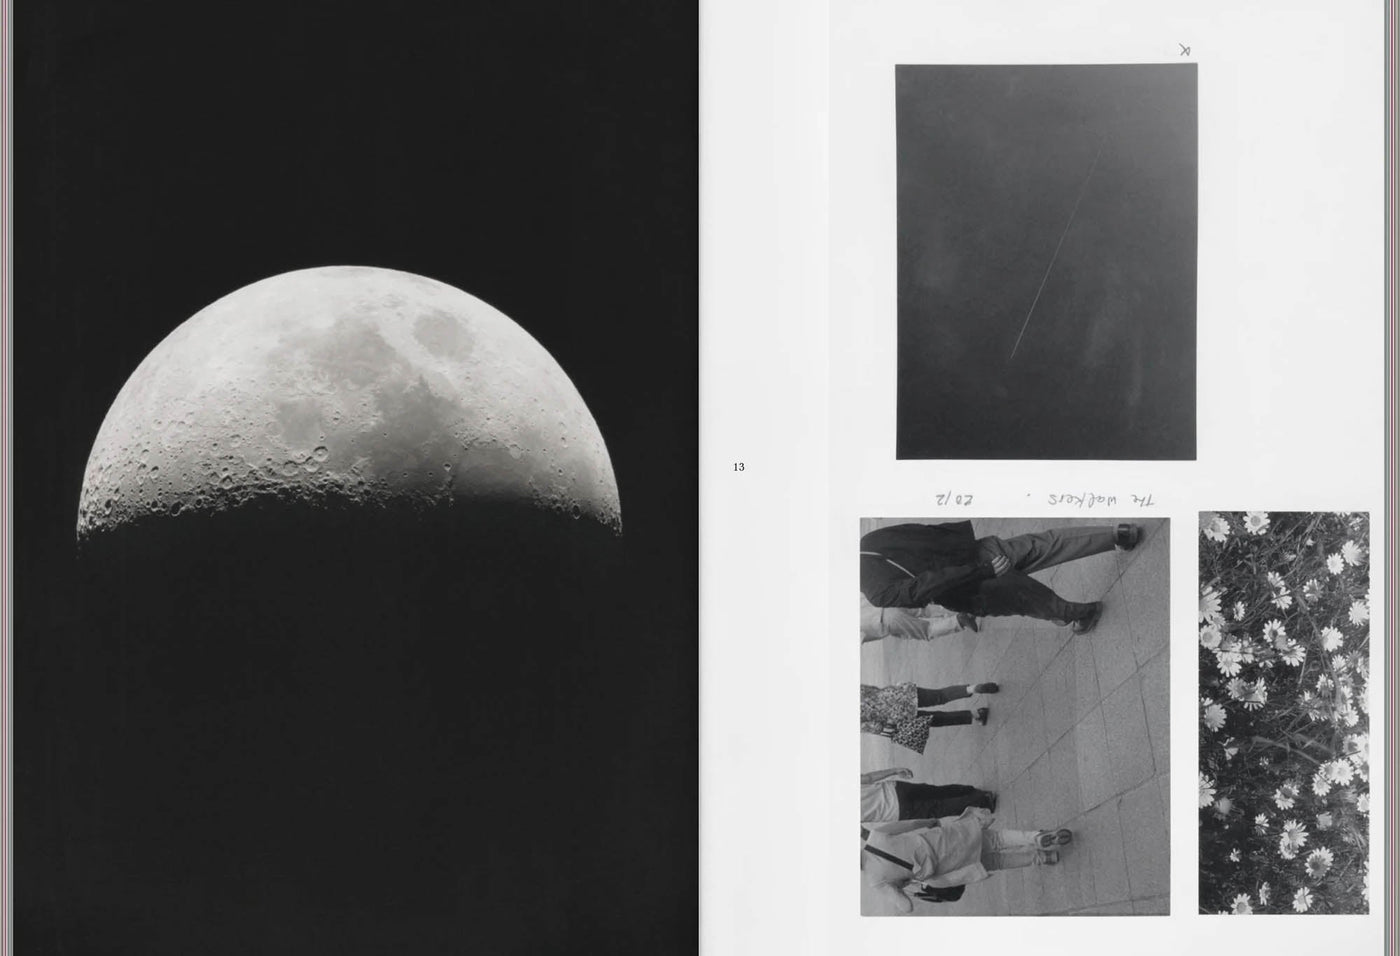 Walk to the moon by Suffo Moncloa - Tipi bookshop